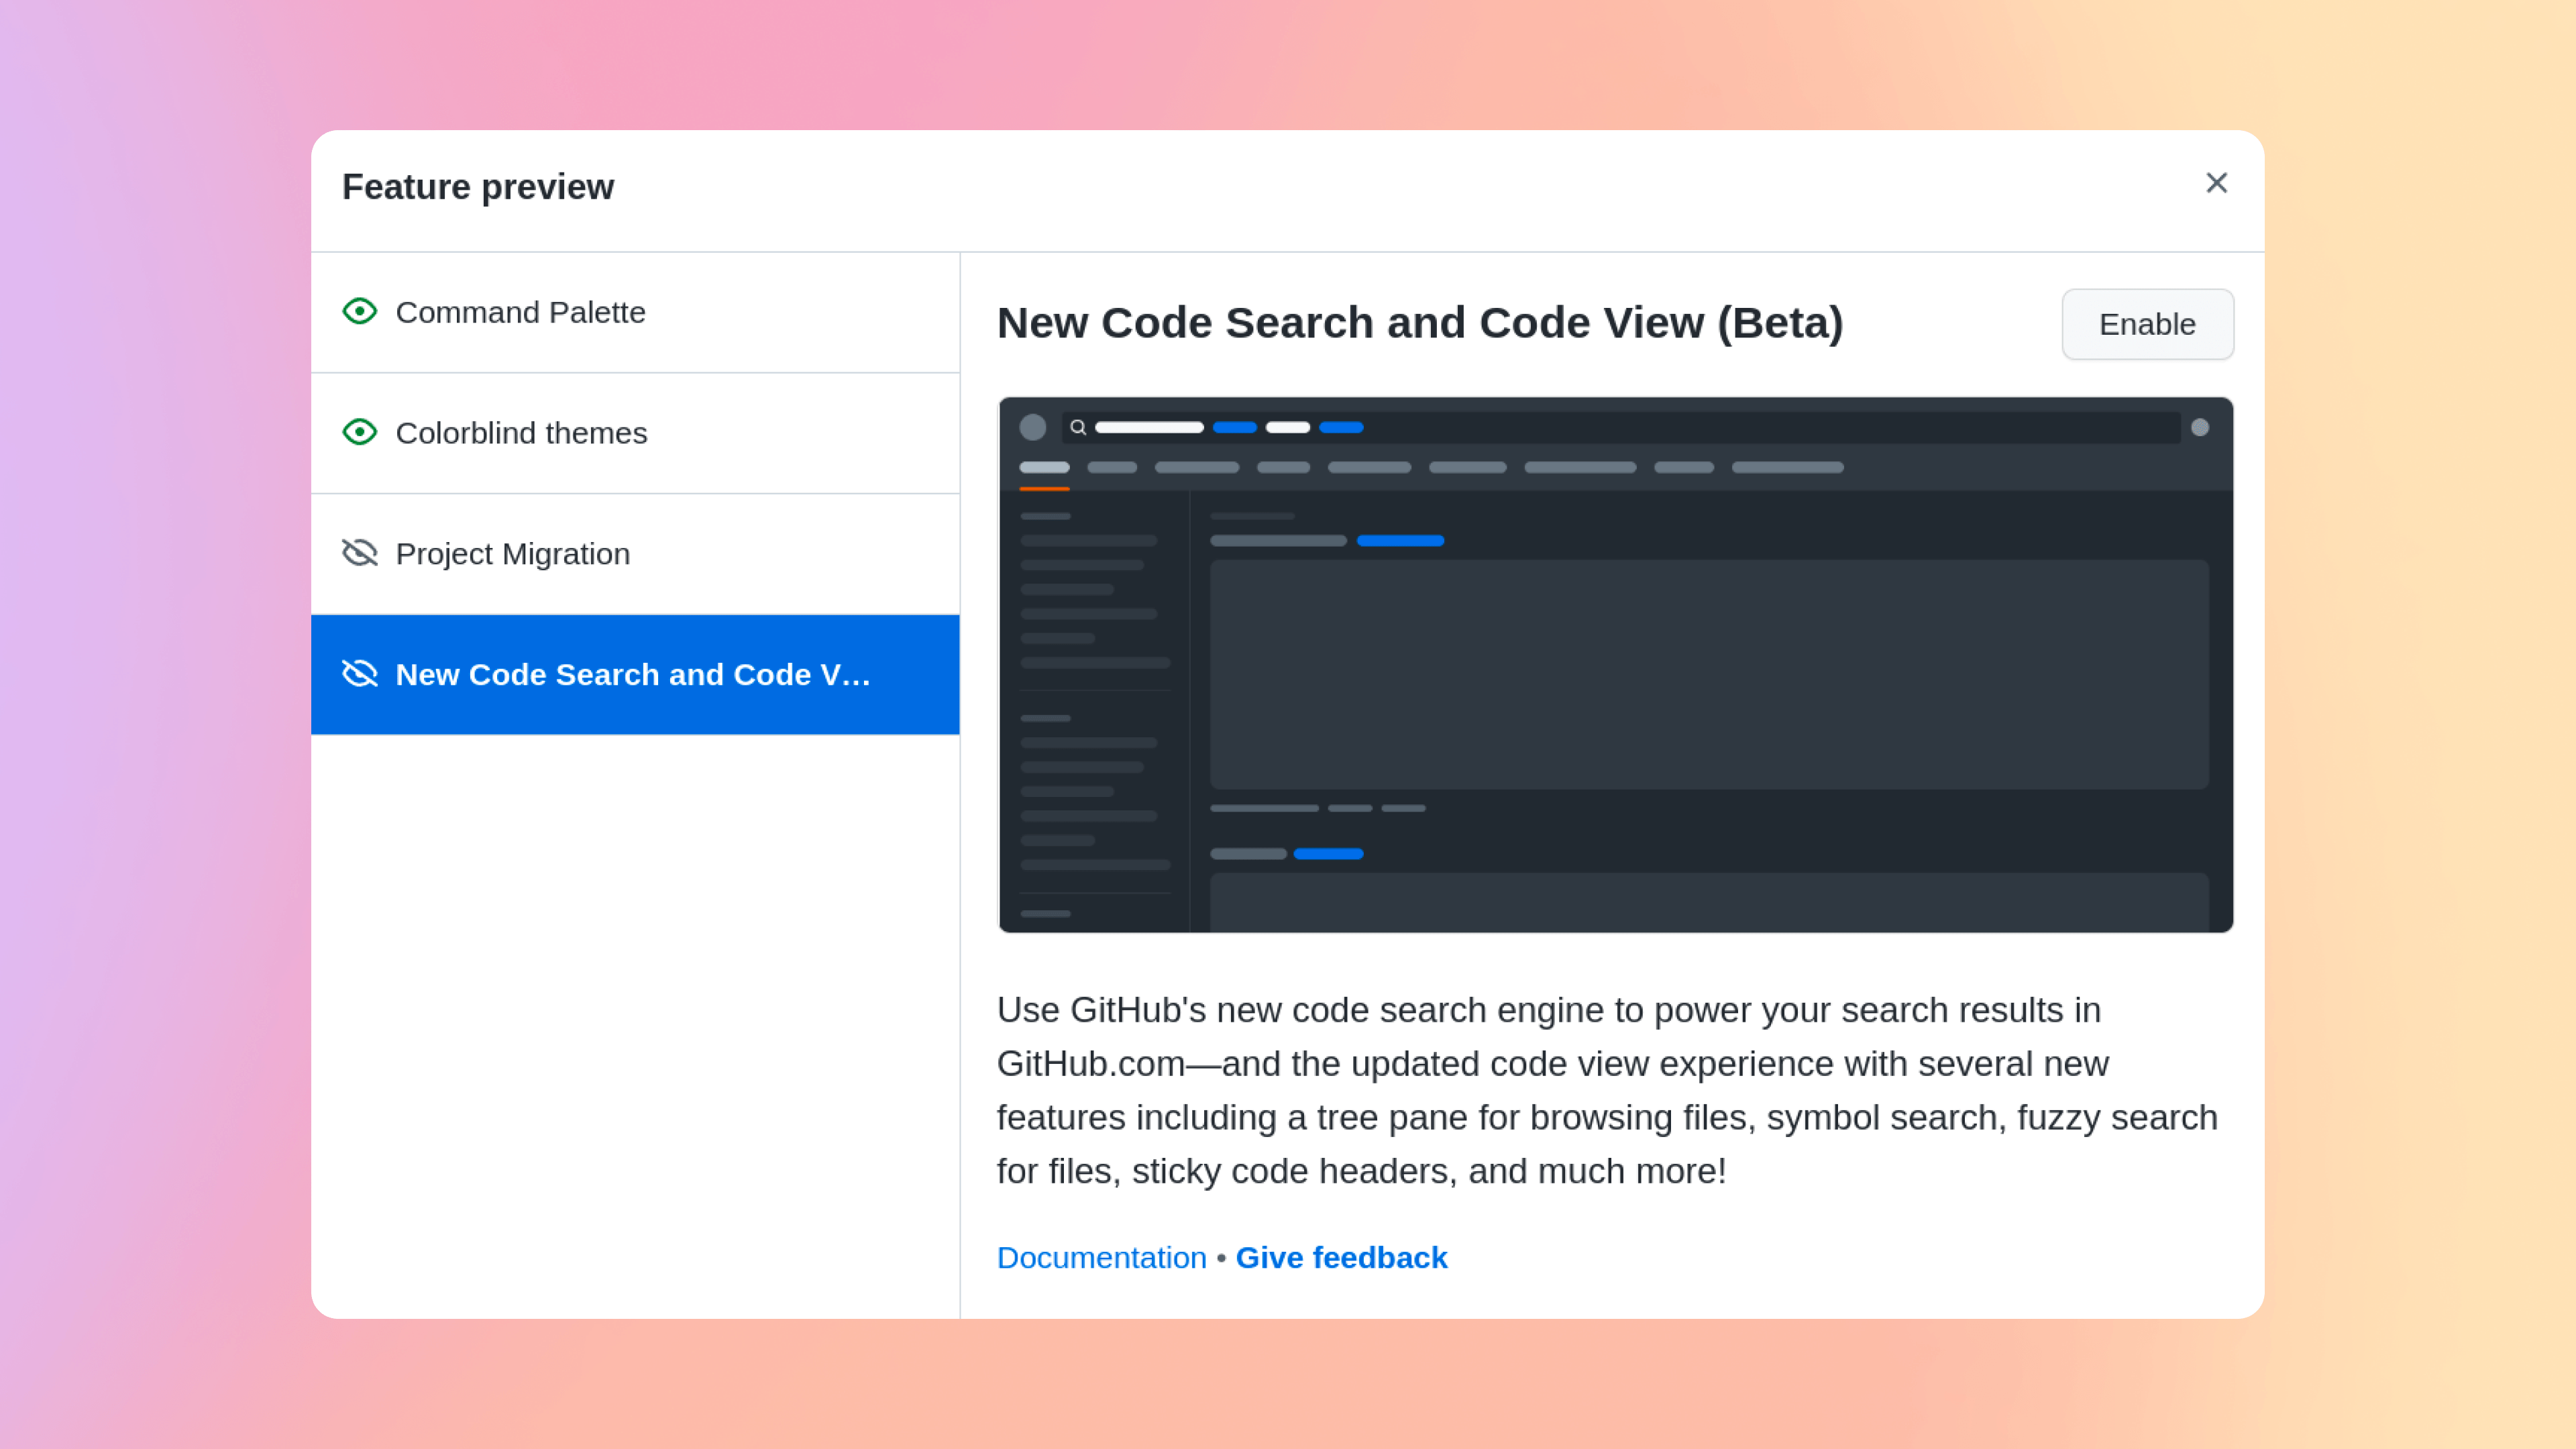 mockup screenshot of new code view and code search features